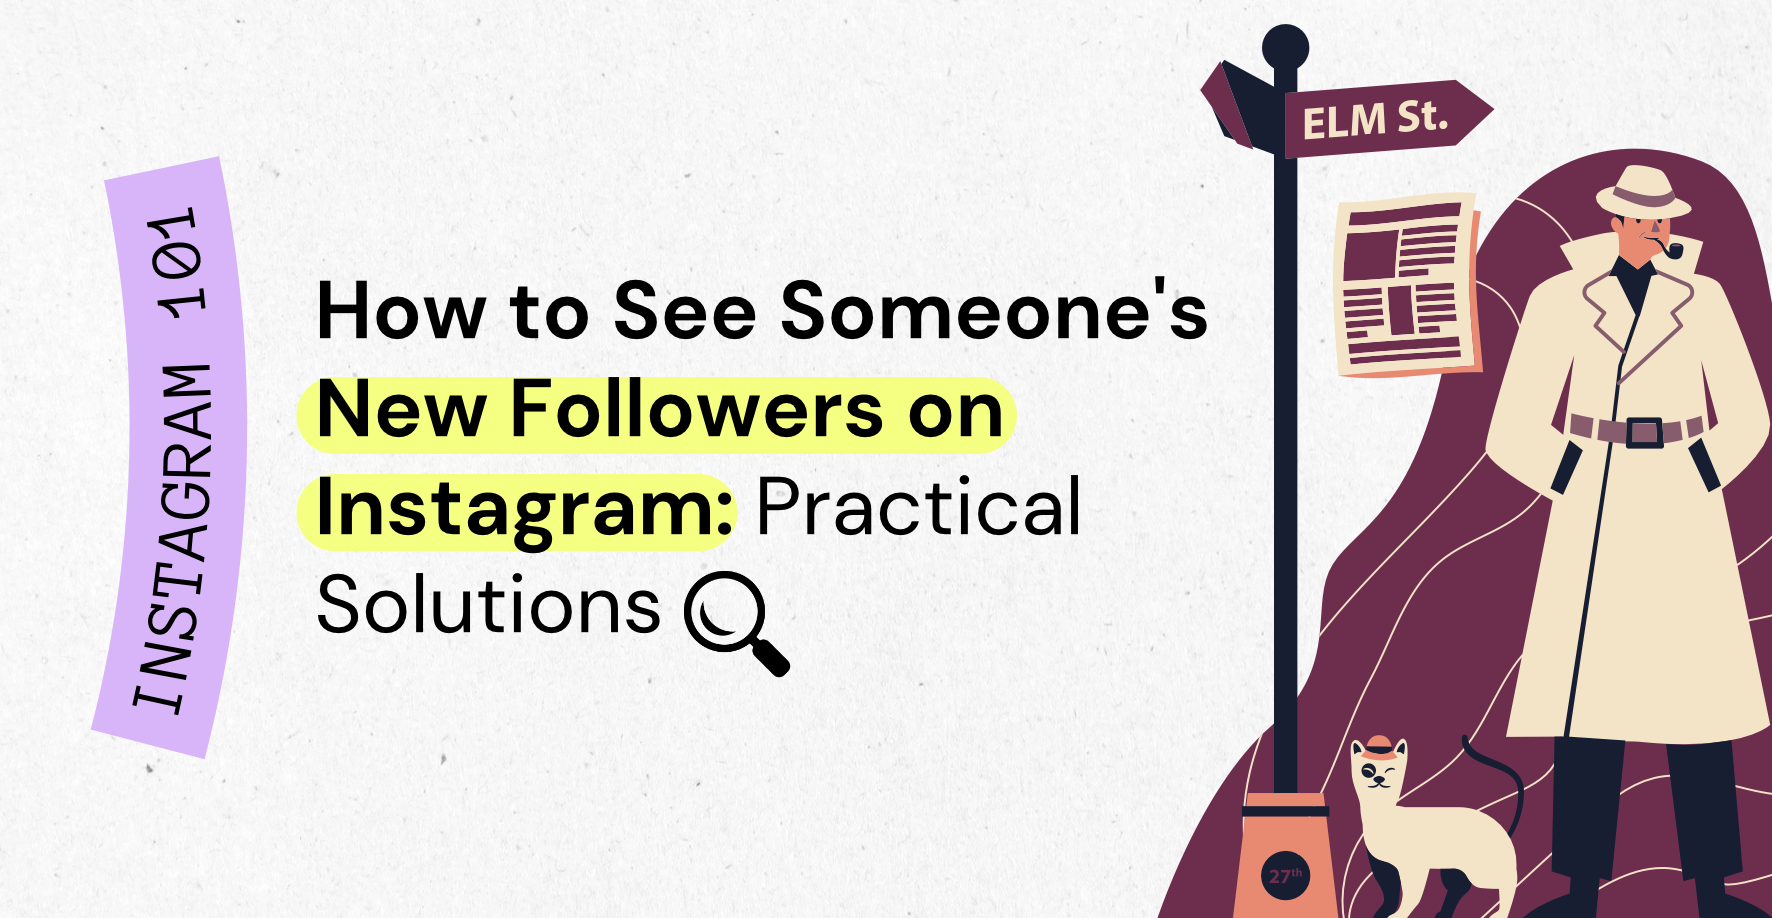 How to See Someone's New Followers on Instagram: Secret Solutions